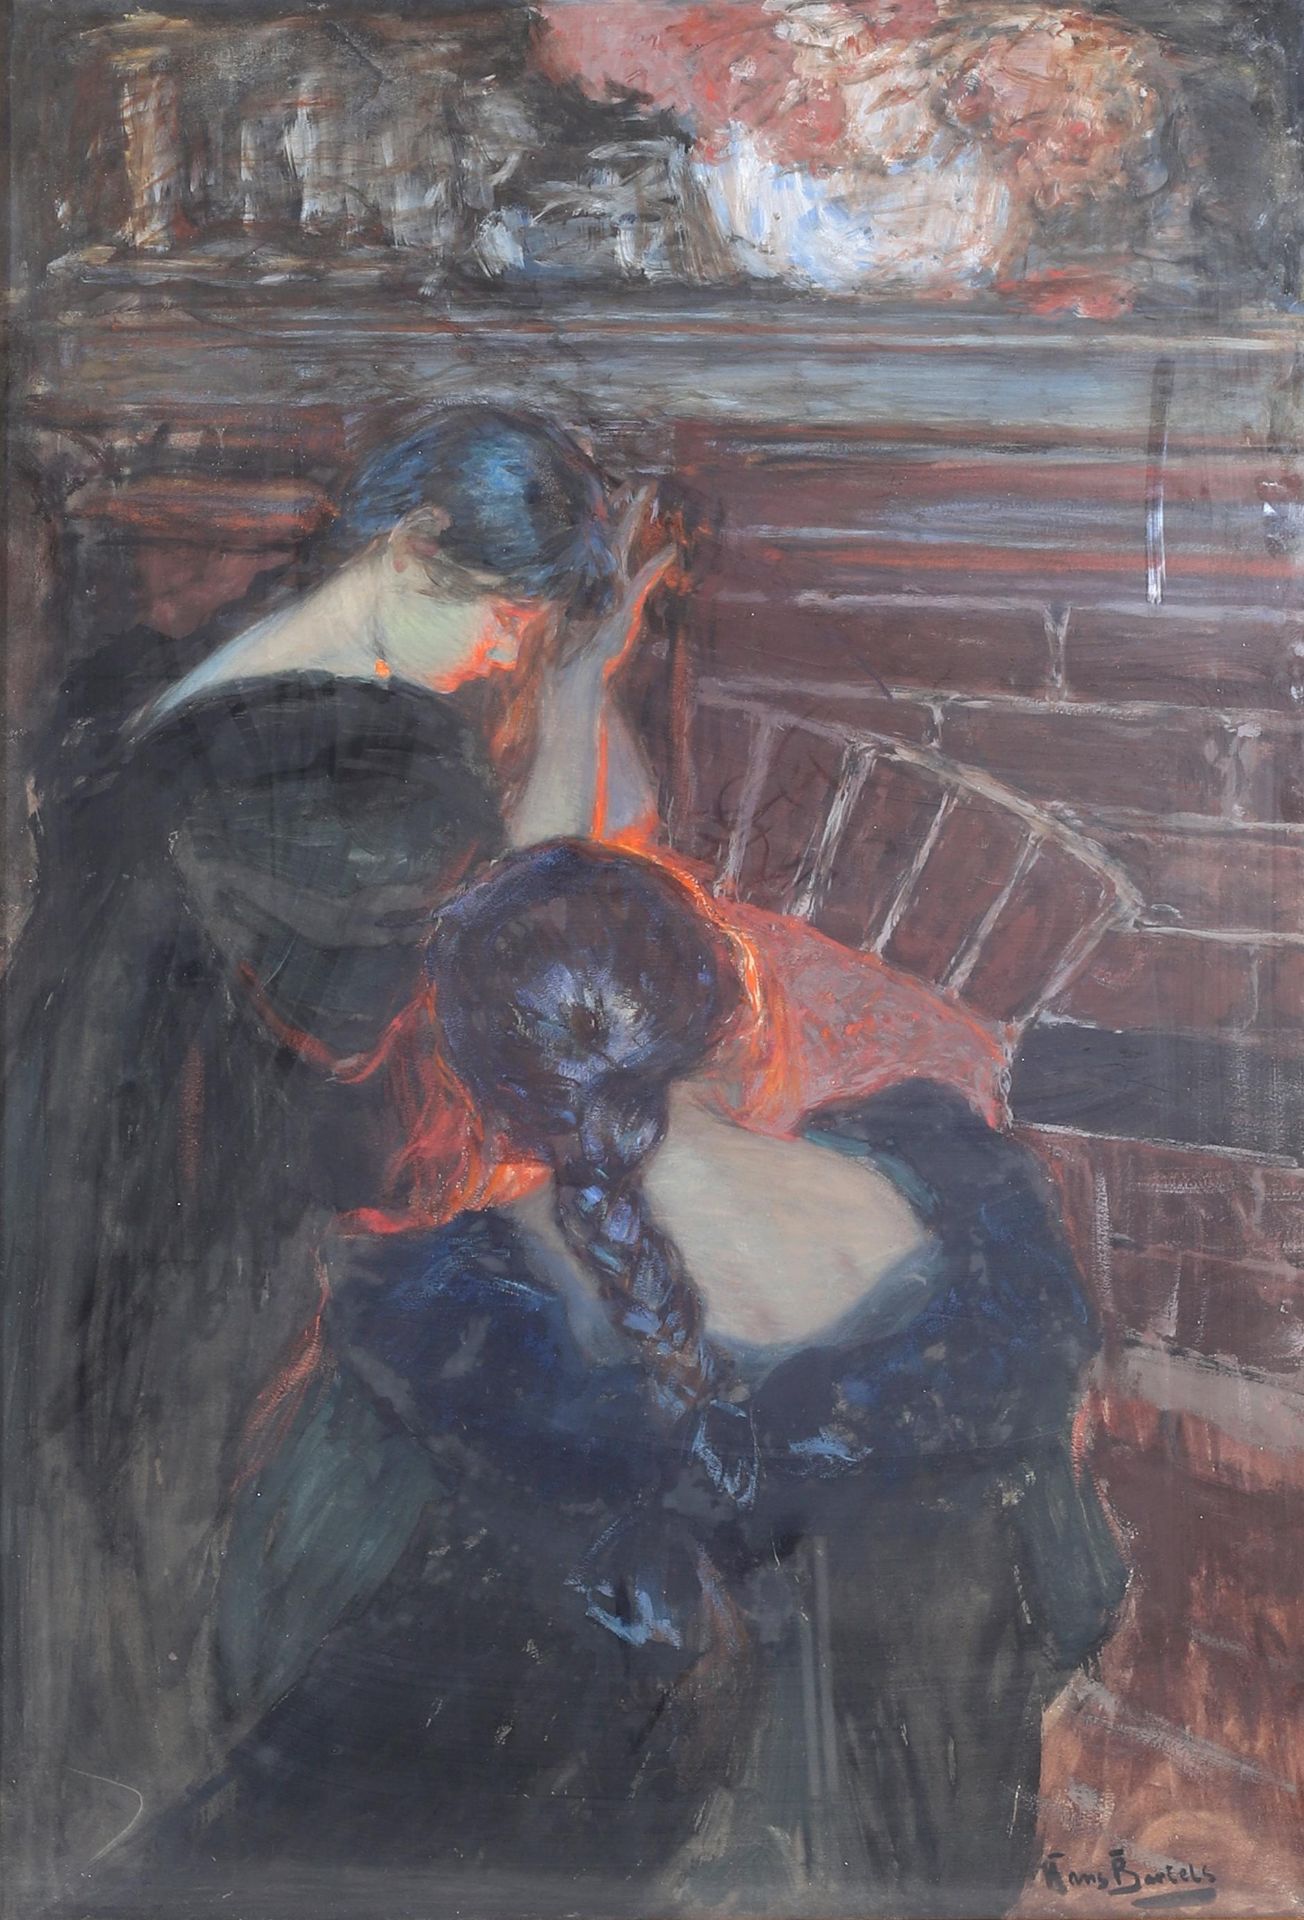 Hans von Bartels (1856-1913) At the Fireplace, signed lower right 'Hans Bartels'. Exhibited at